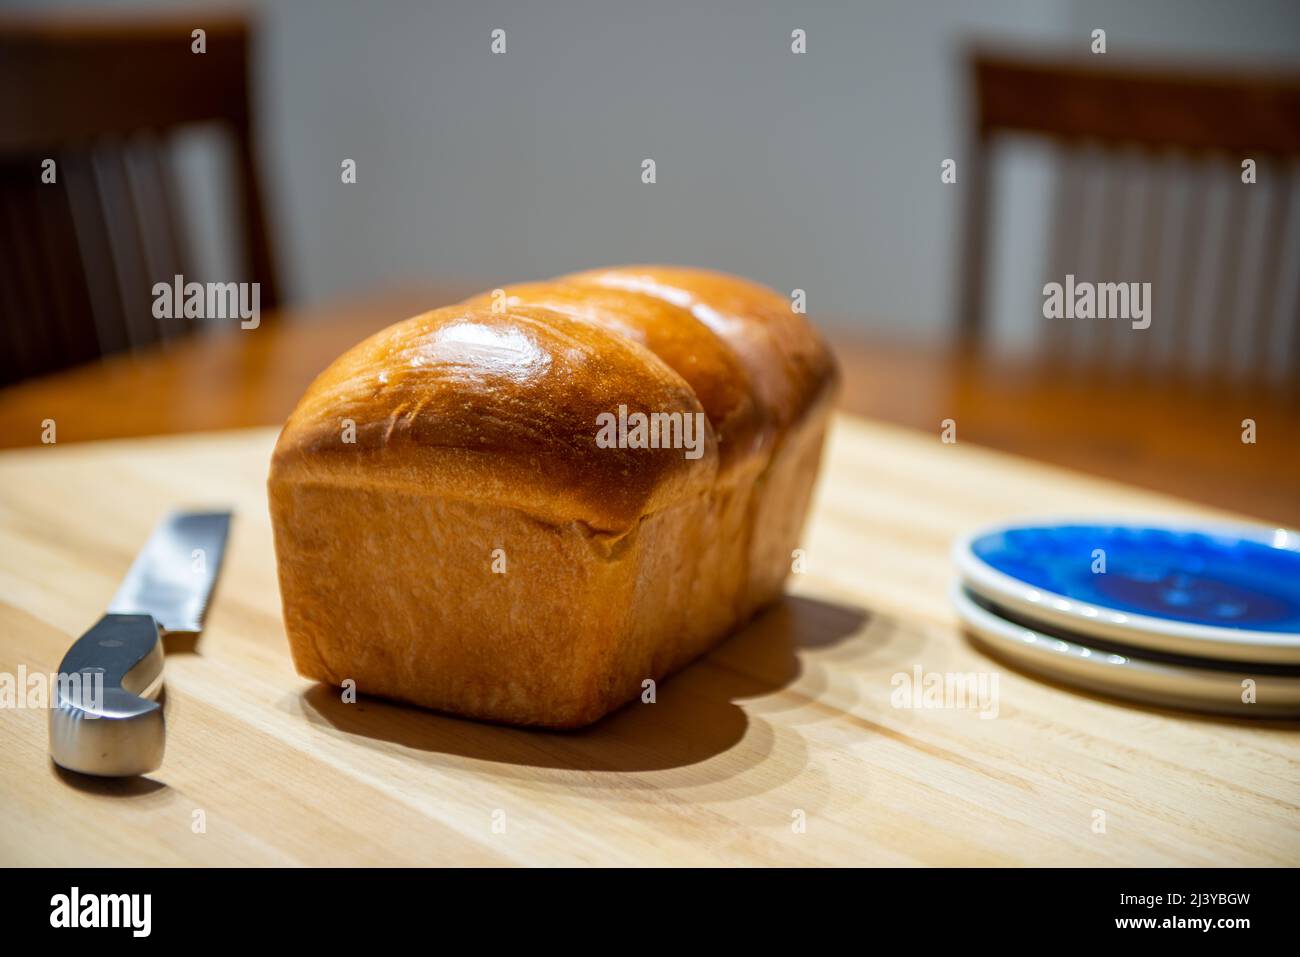 A single loaf of fresh white bread on a wooden cutting board in a kitchen. The warm crisp bun has melted butter over the crisp loaf. Stock Photo